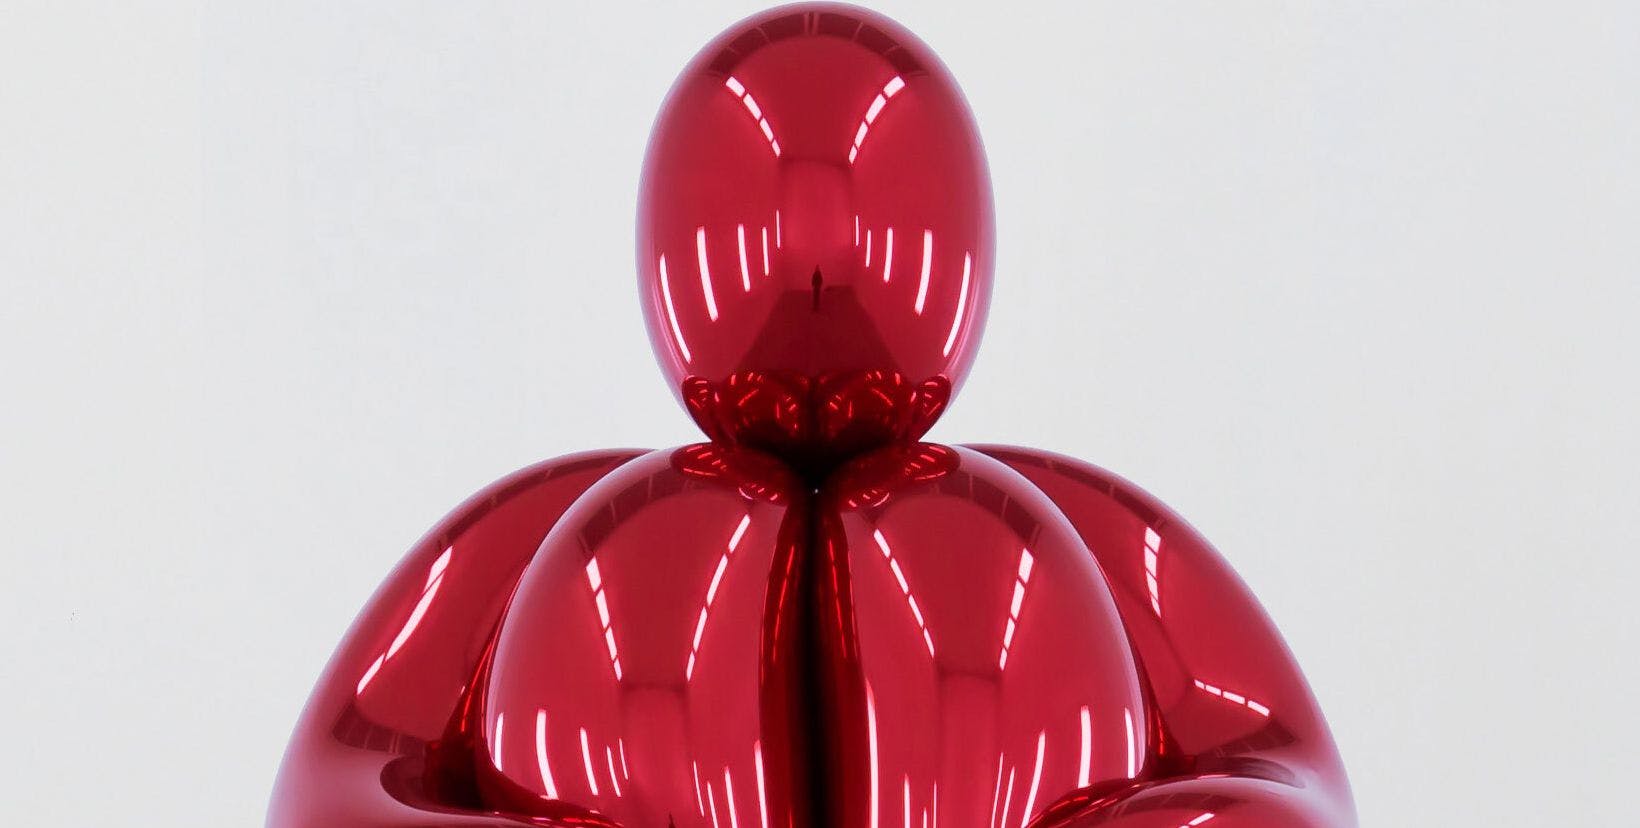 A detail from a sculpture by Jeff Koons, titled Balloon Venus Lespugue (Red), dated 2013–2019.